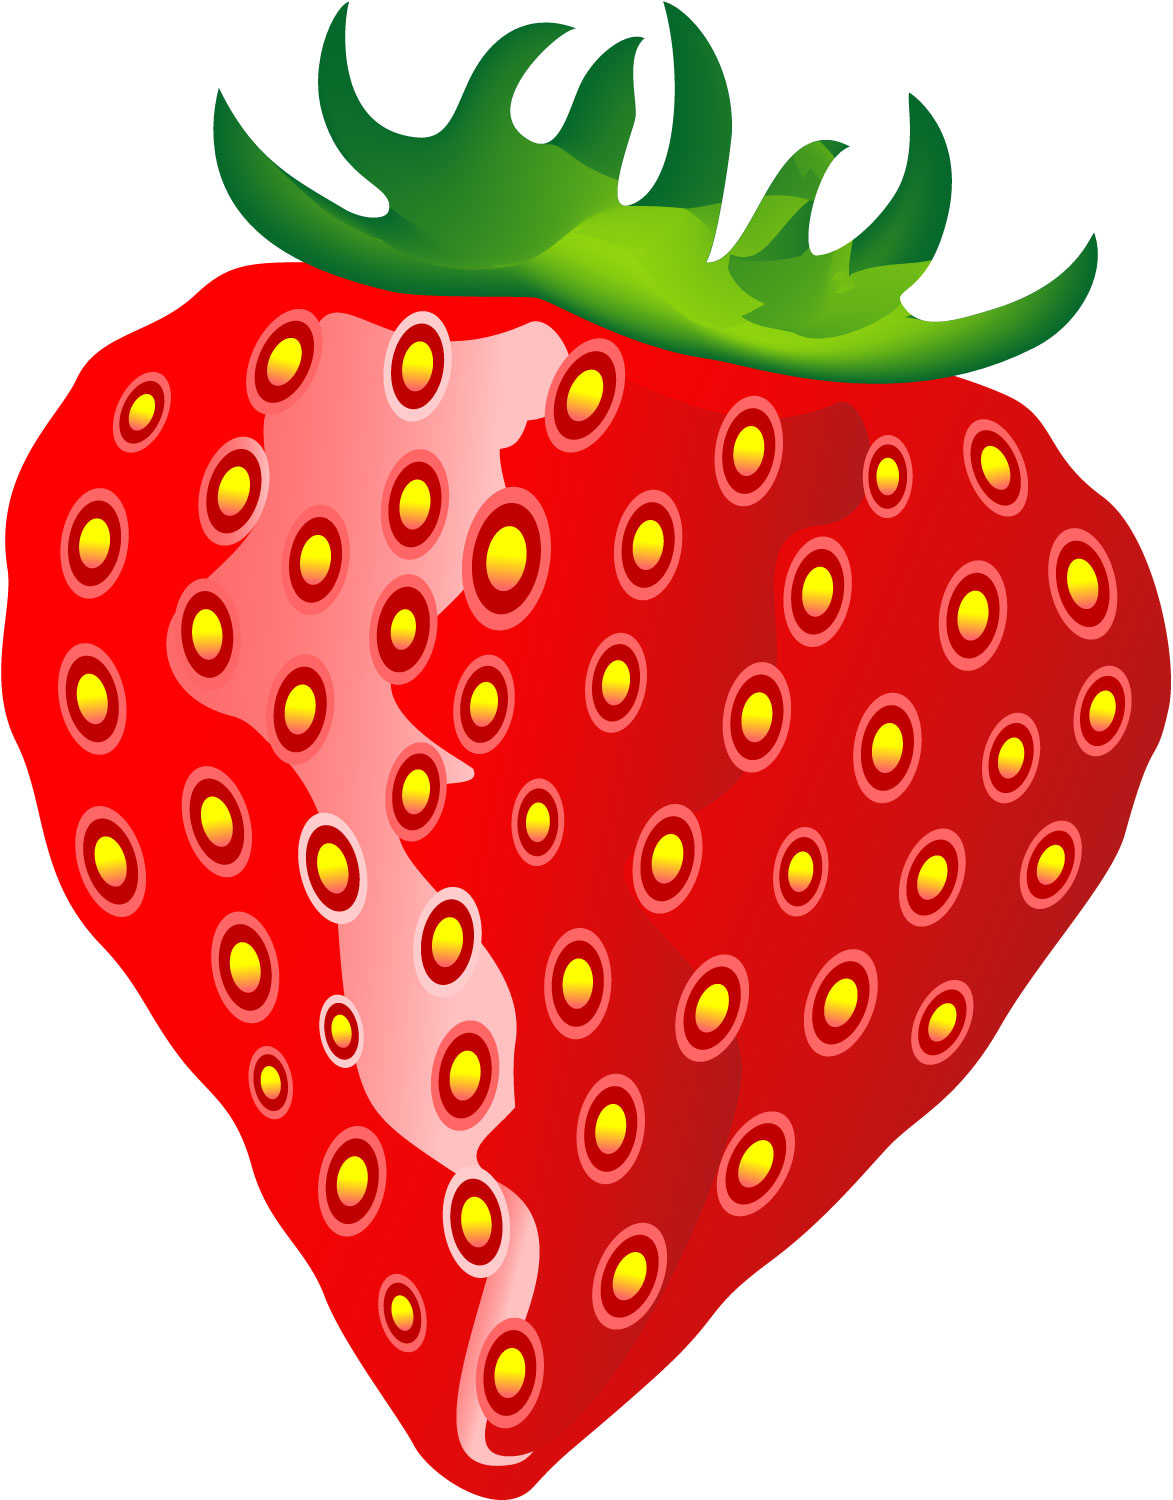 Strawberry Clipart Border - Free Clipart Images